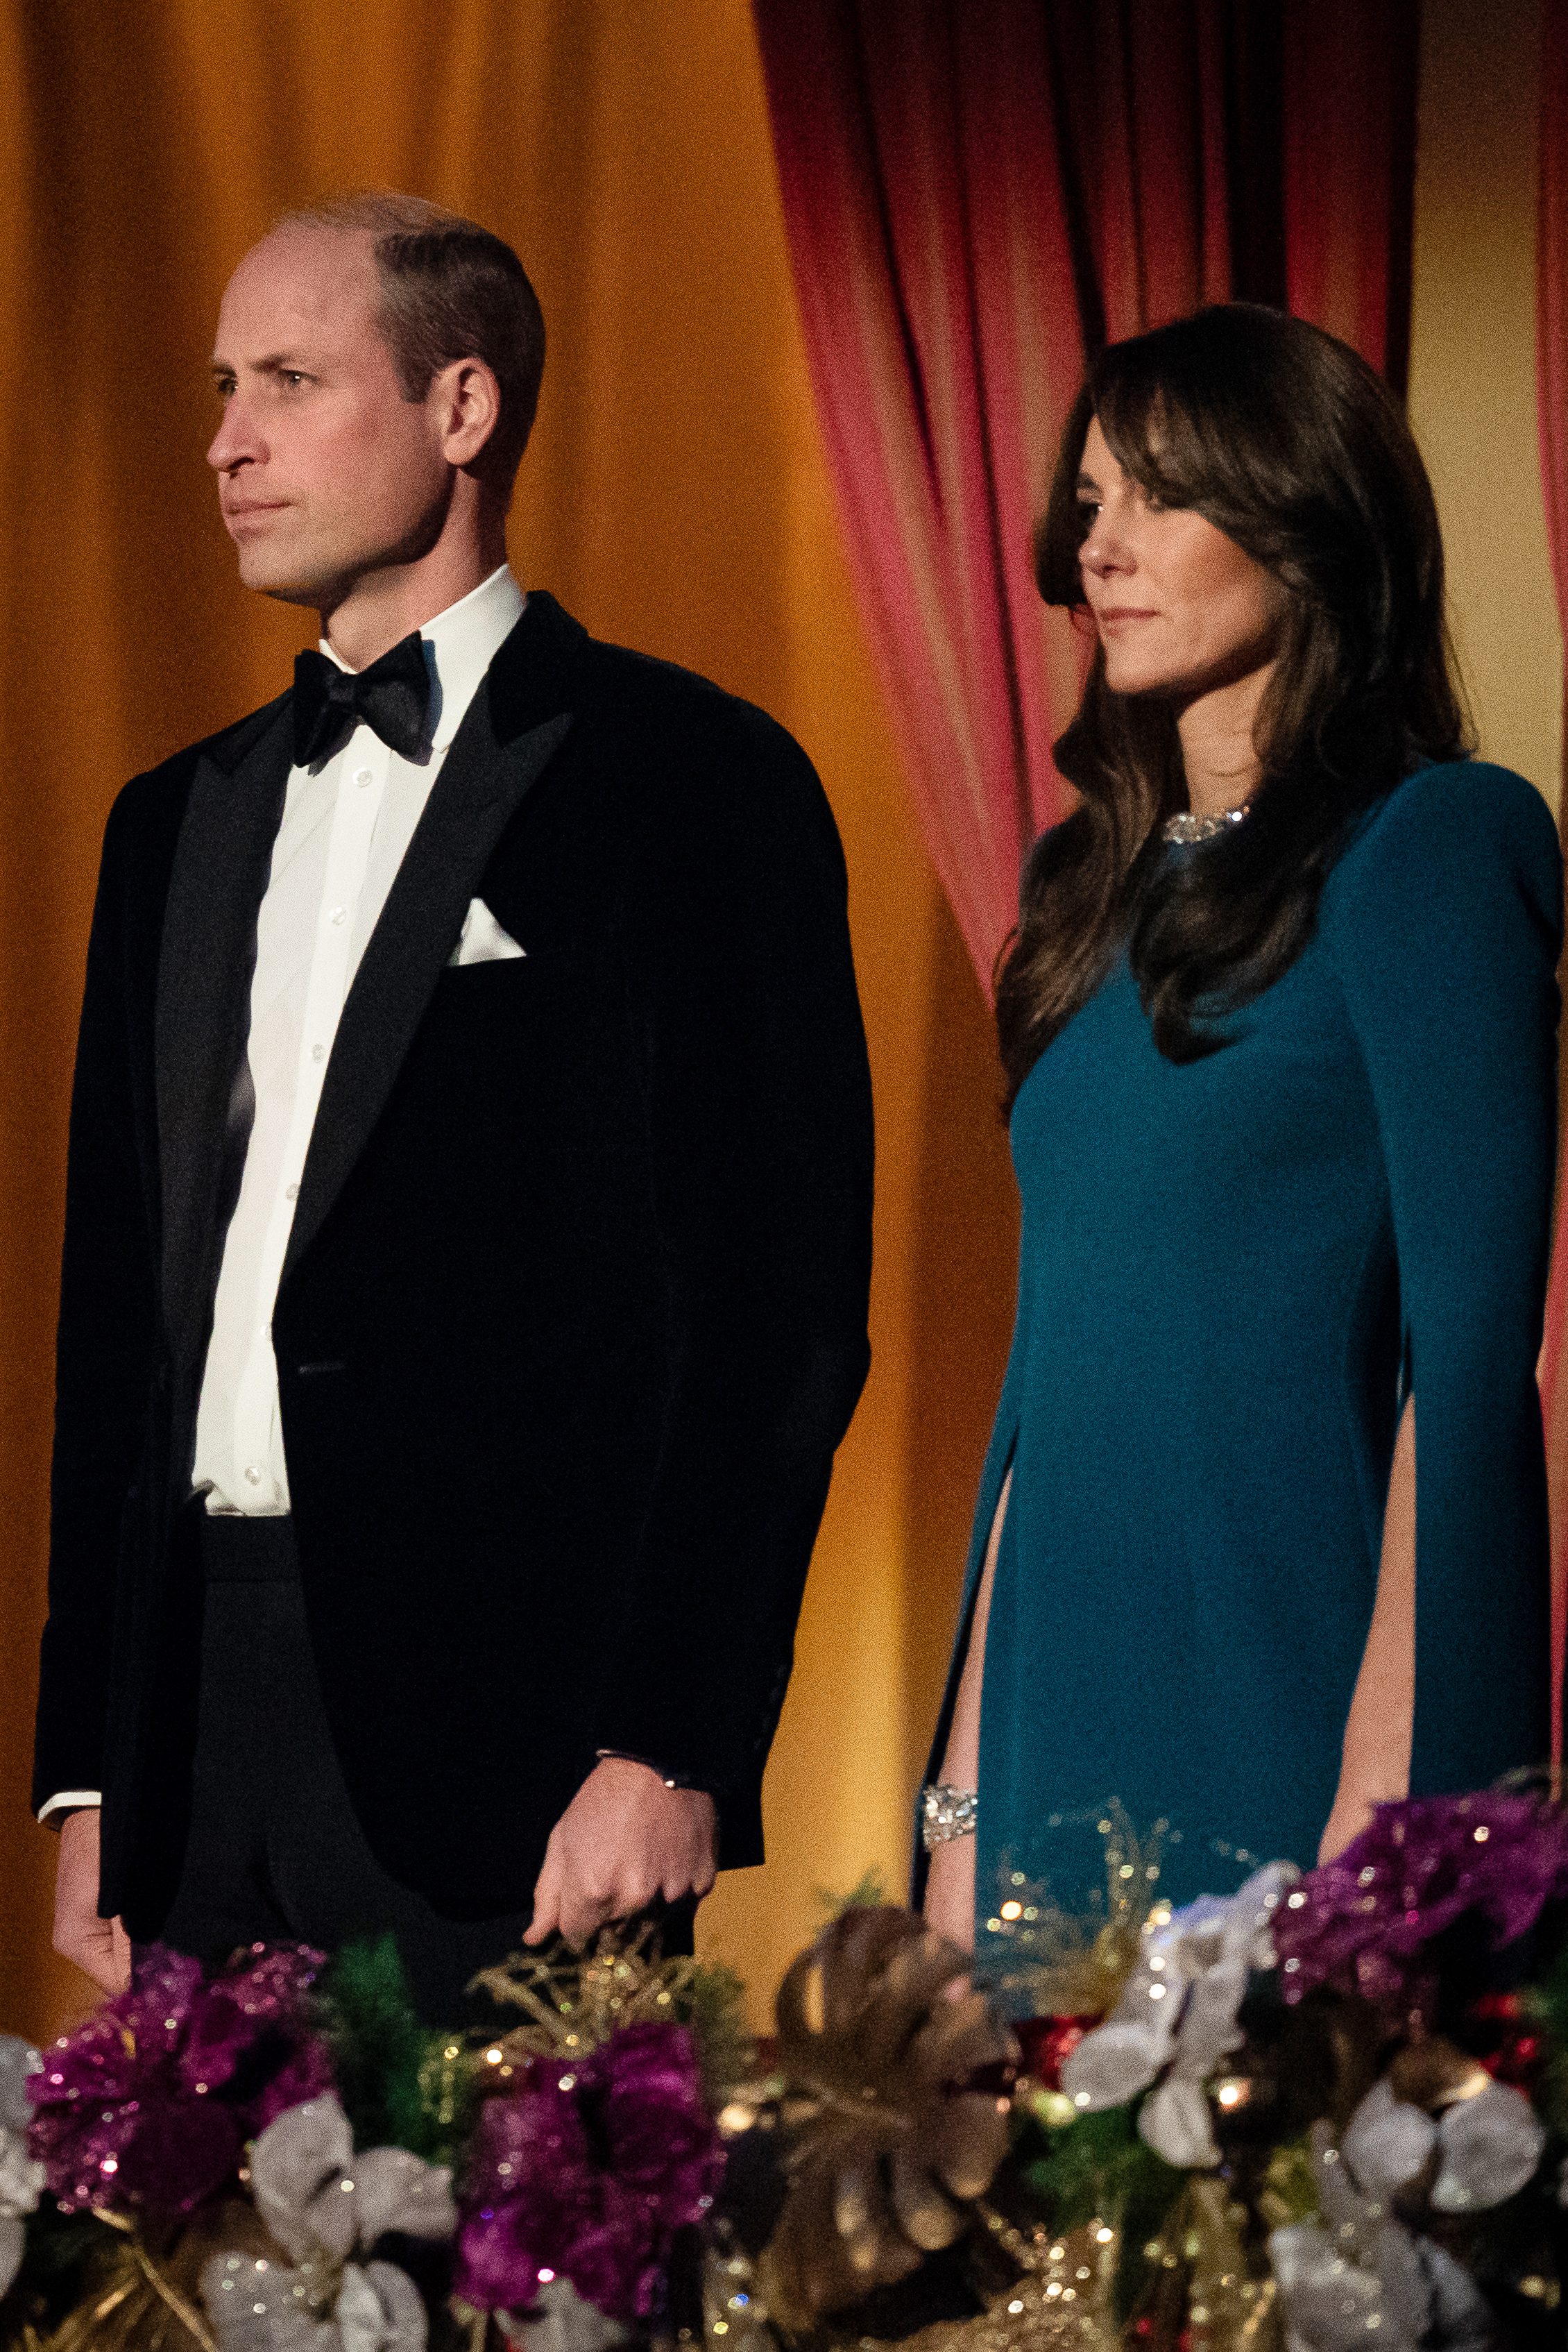 Prince William and Kate Middleton at the Royal Variety Performance in London, England on November 30, 2023 | Source: Getty Images